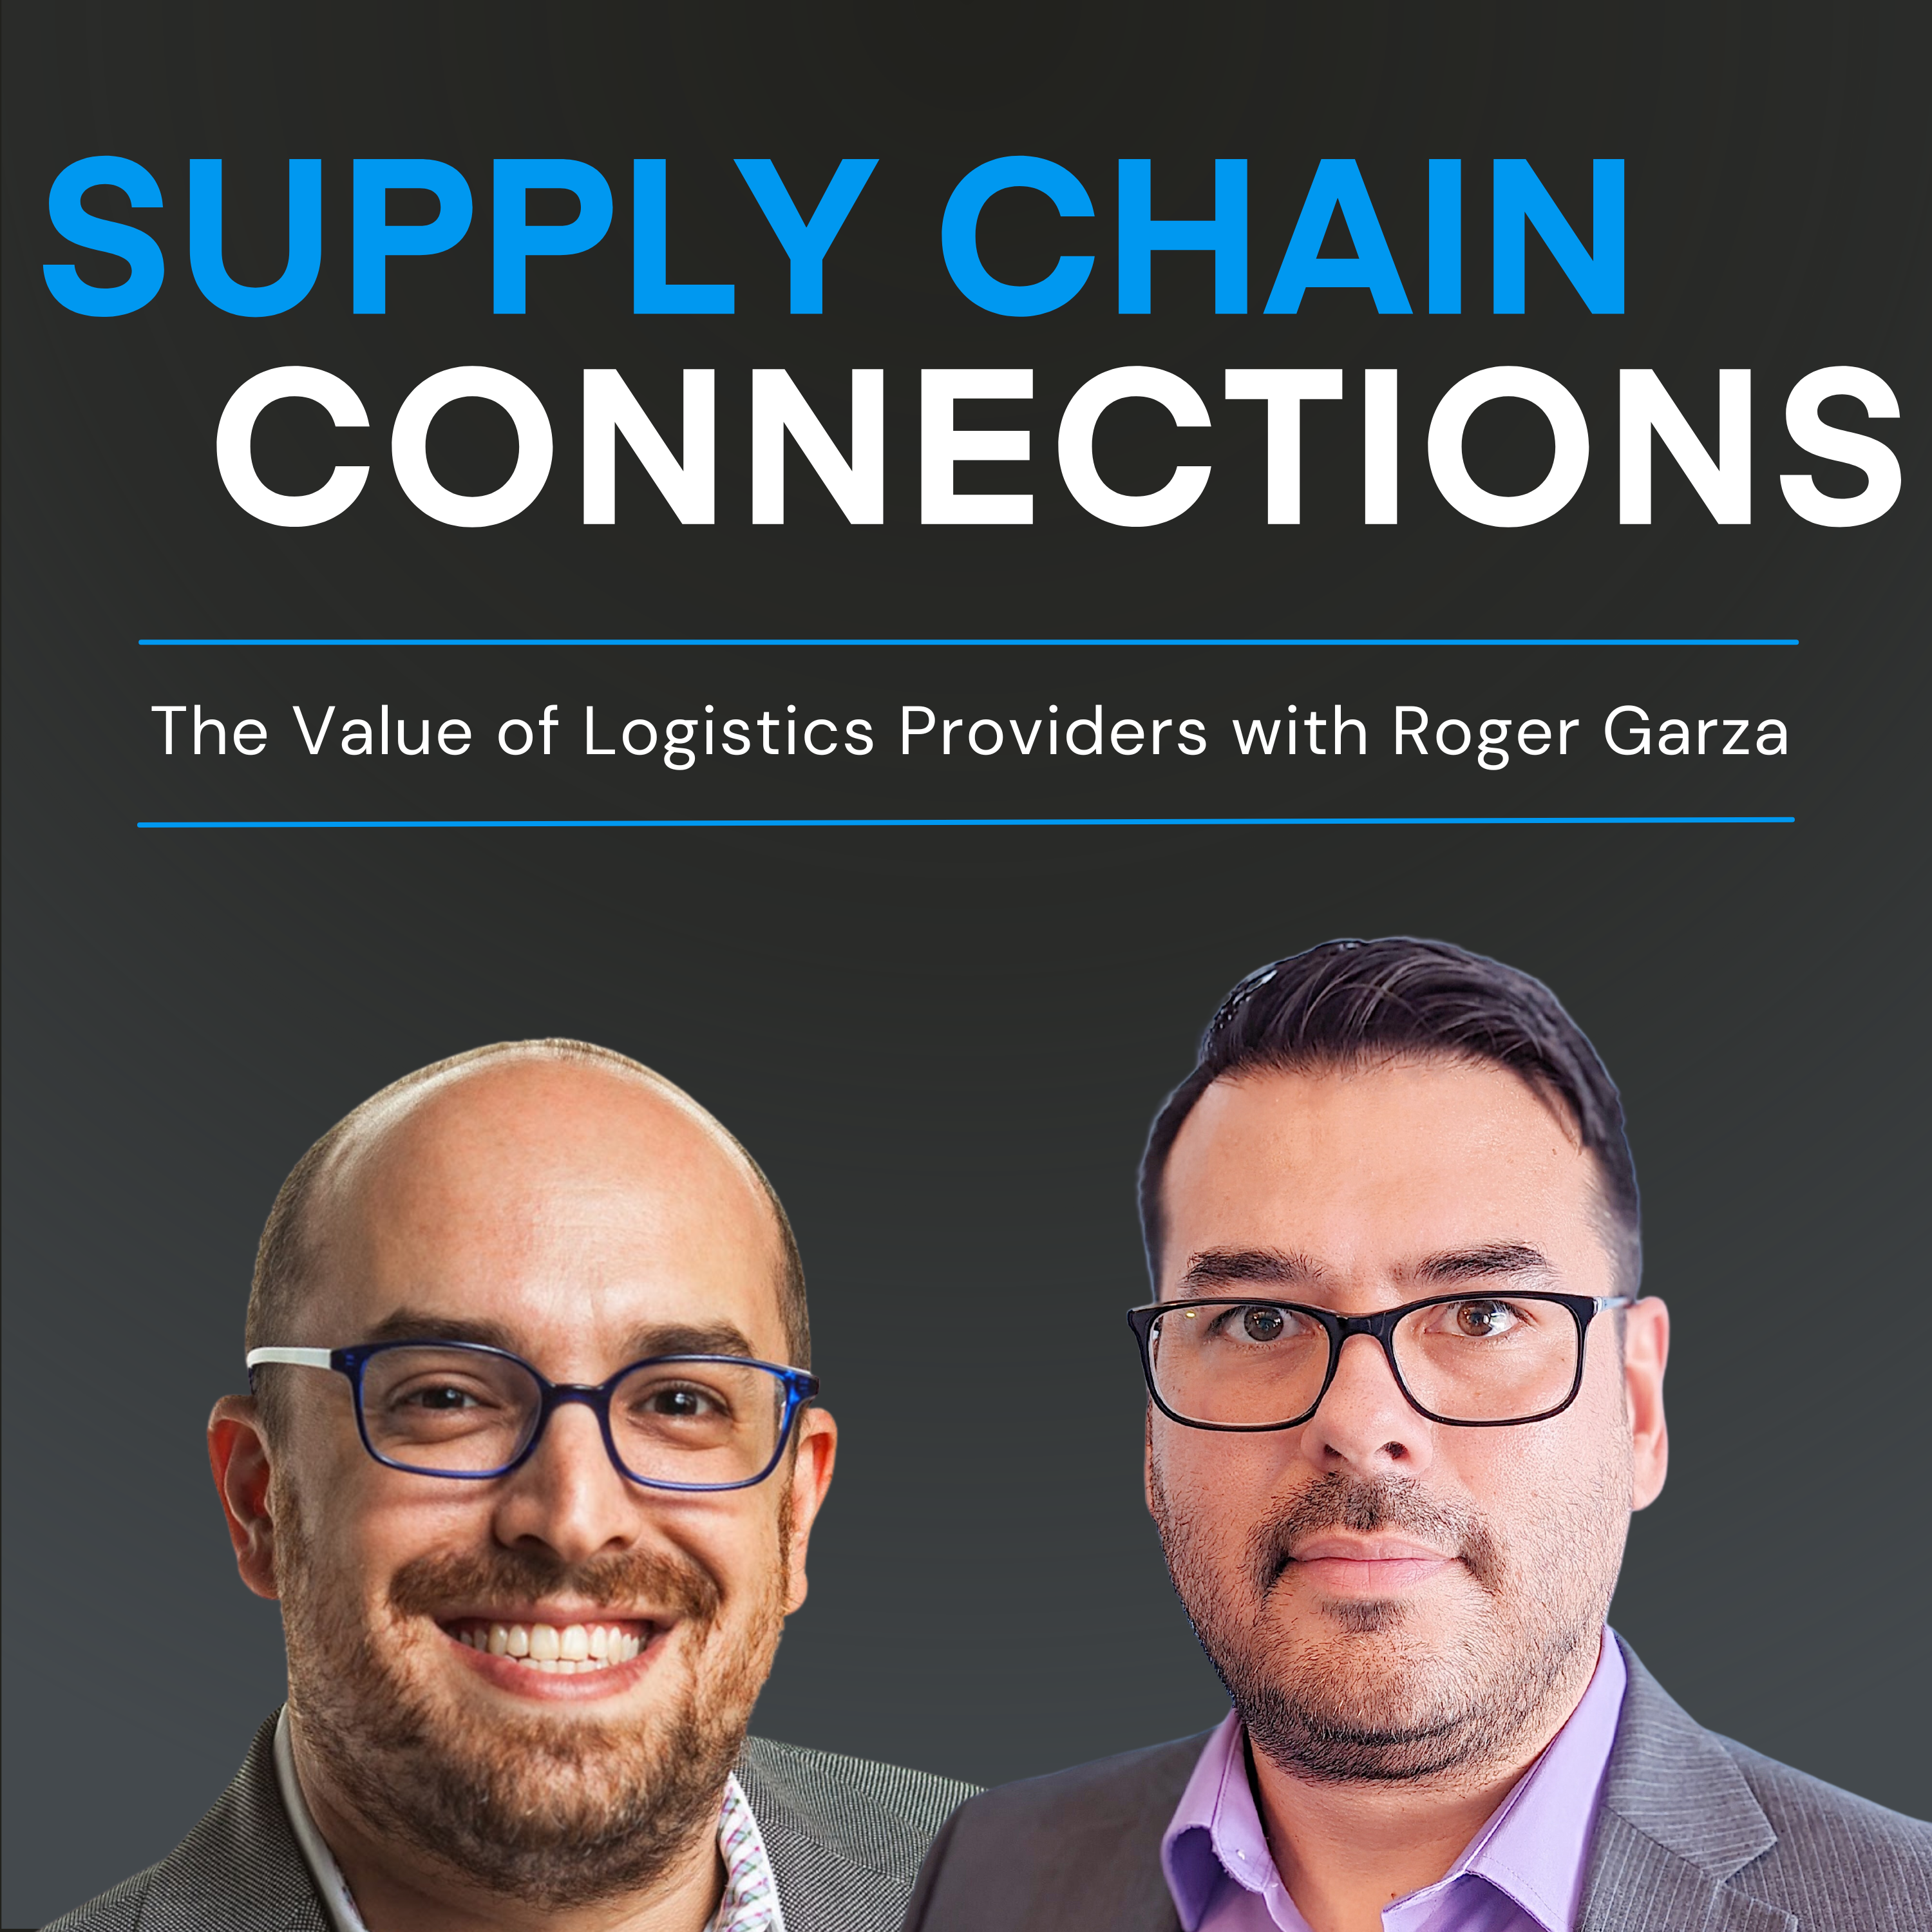 In this episode, Roger Garza, Director of Global Product Management at xpd global, joins Host Brian Glick, CEO of Chain.io, to discuss